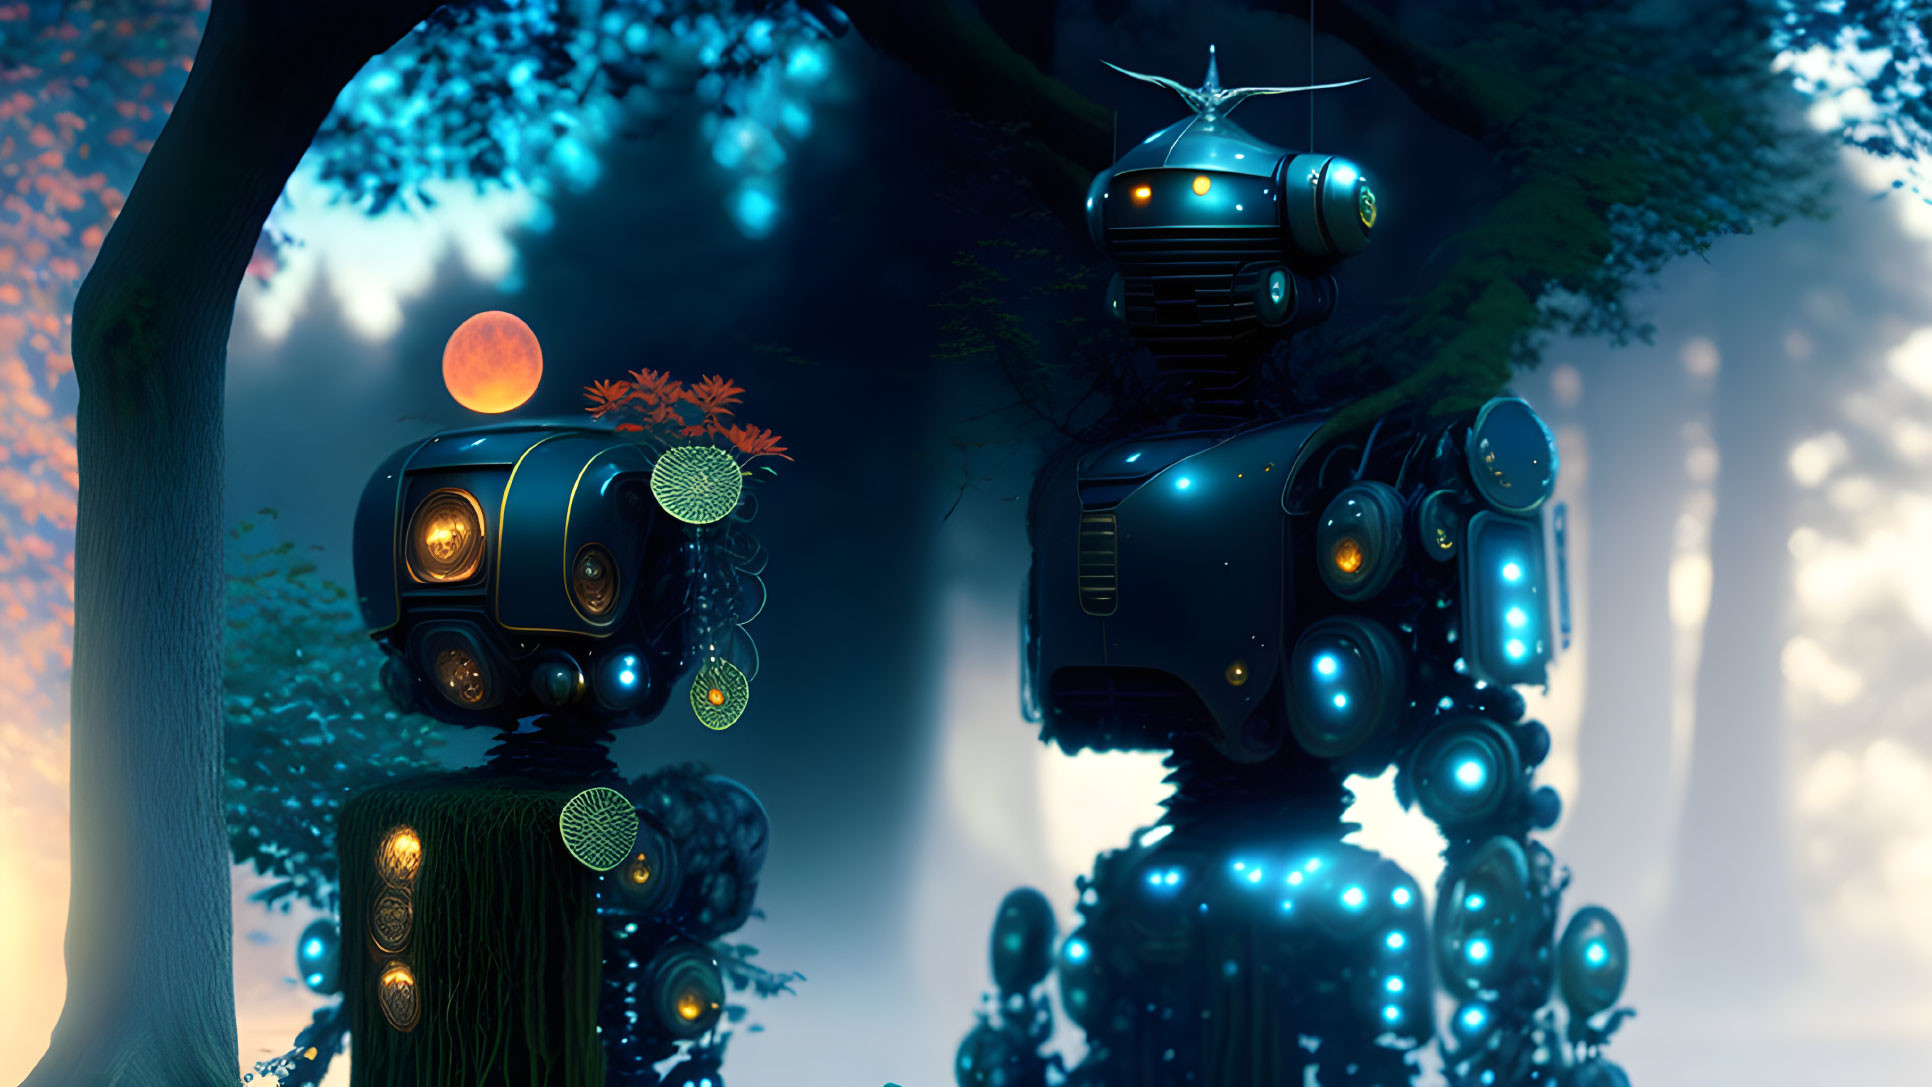 Stylized robots in mystical forest with orange sphere, luminescent plants, blue lighting